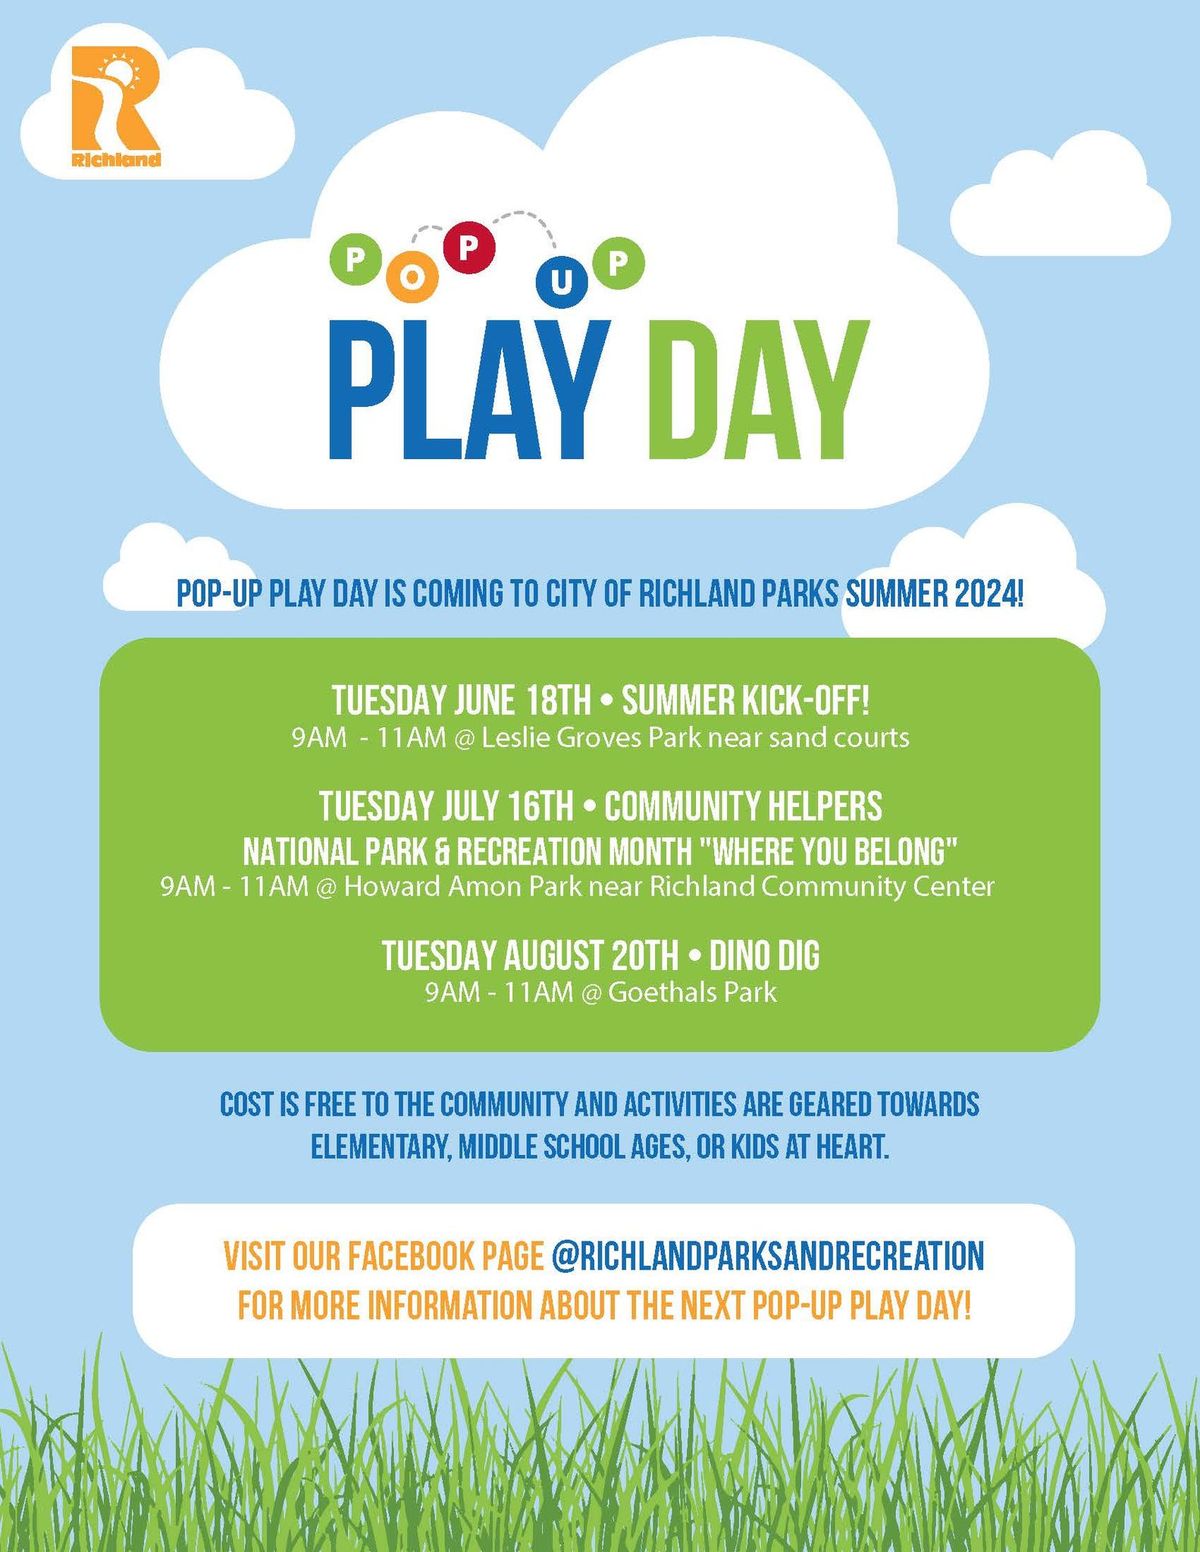 Pop Up Play Day